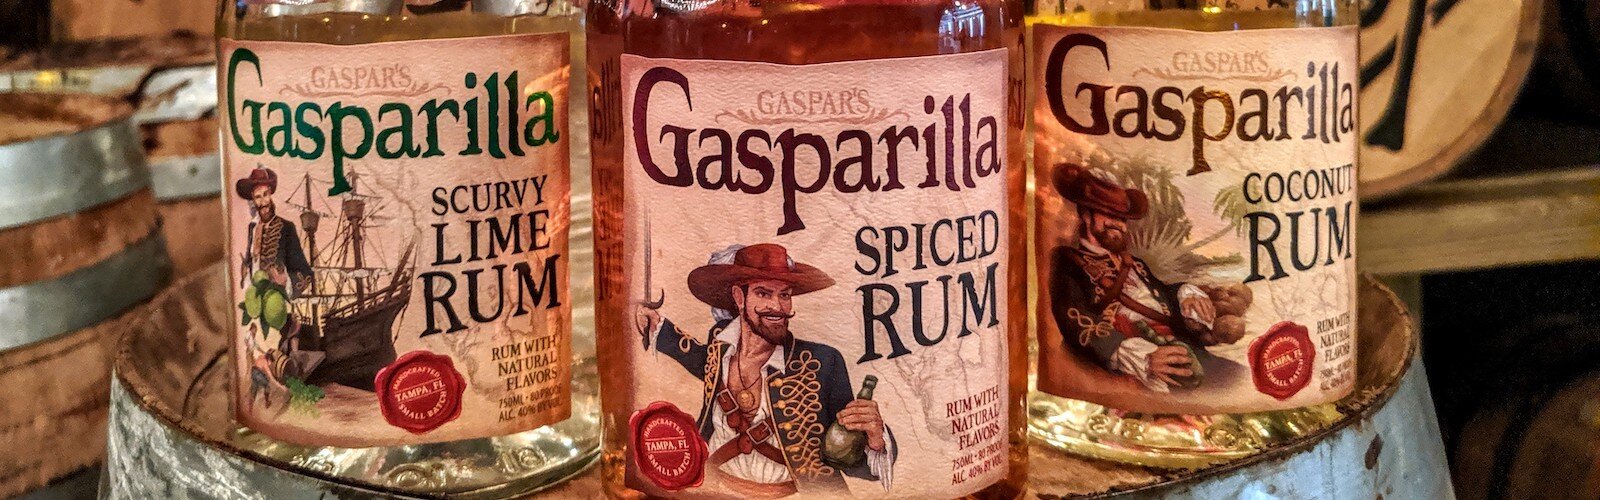 The many flavors of Gasparilla Rums at Tampa Bay Rum Company.